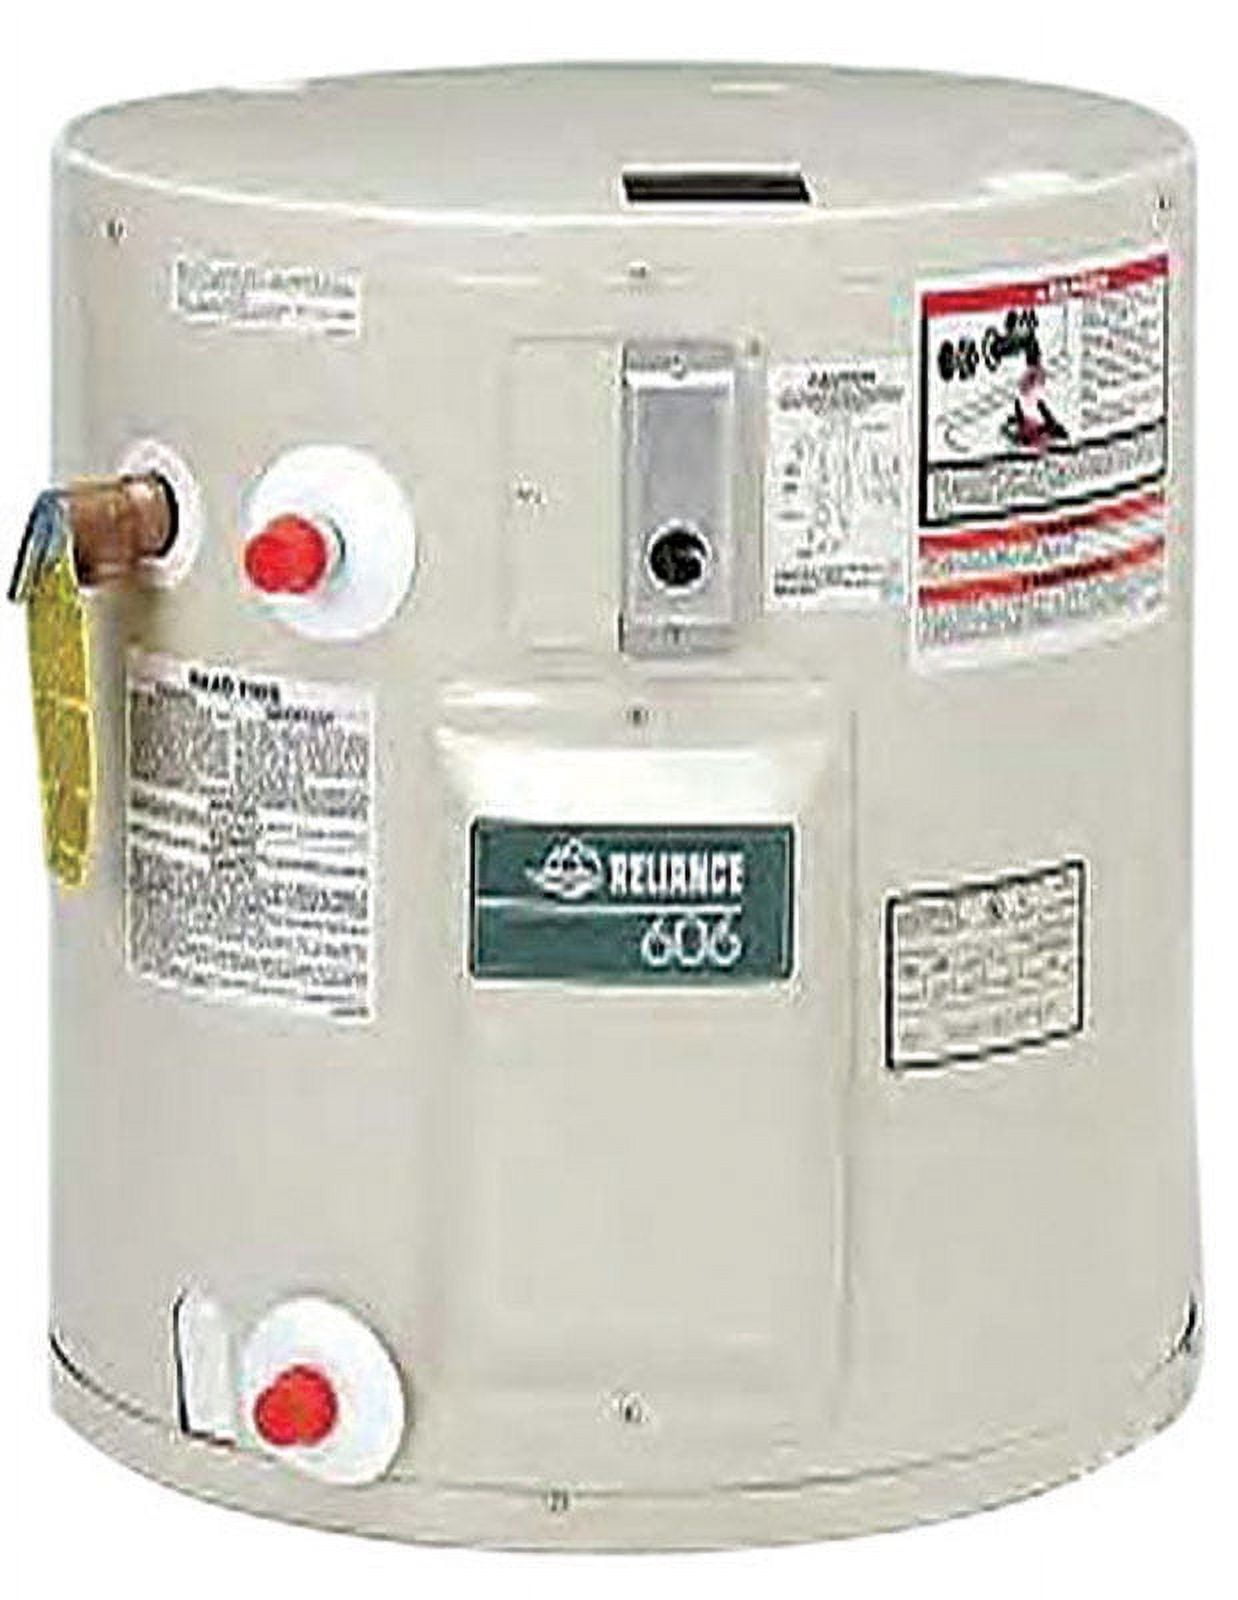 UPC 091193000489 product image for 4299533 19 gal 2000 Electric Water Heater | upcitemdb.com